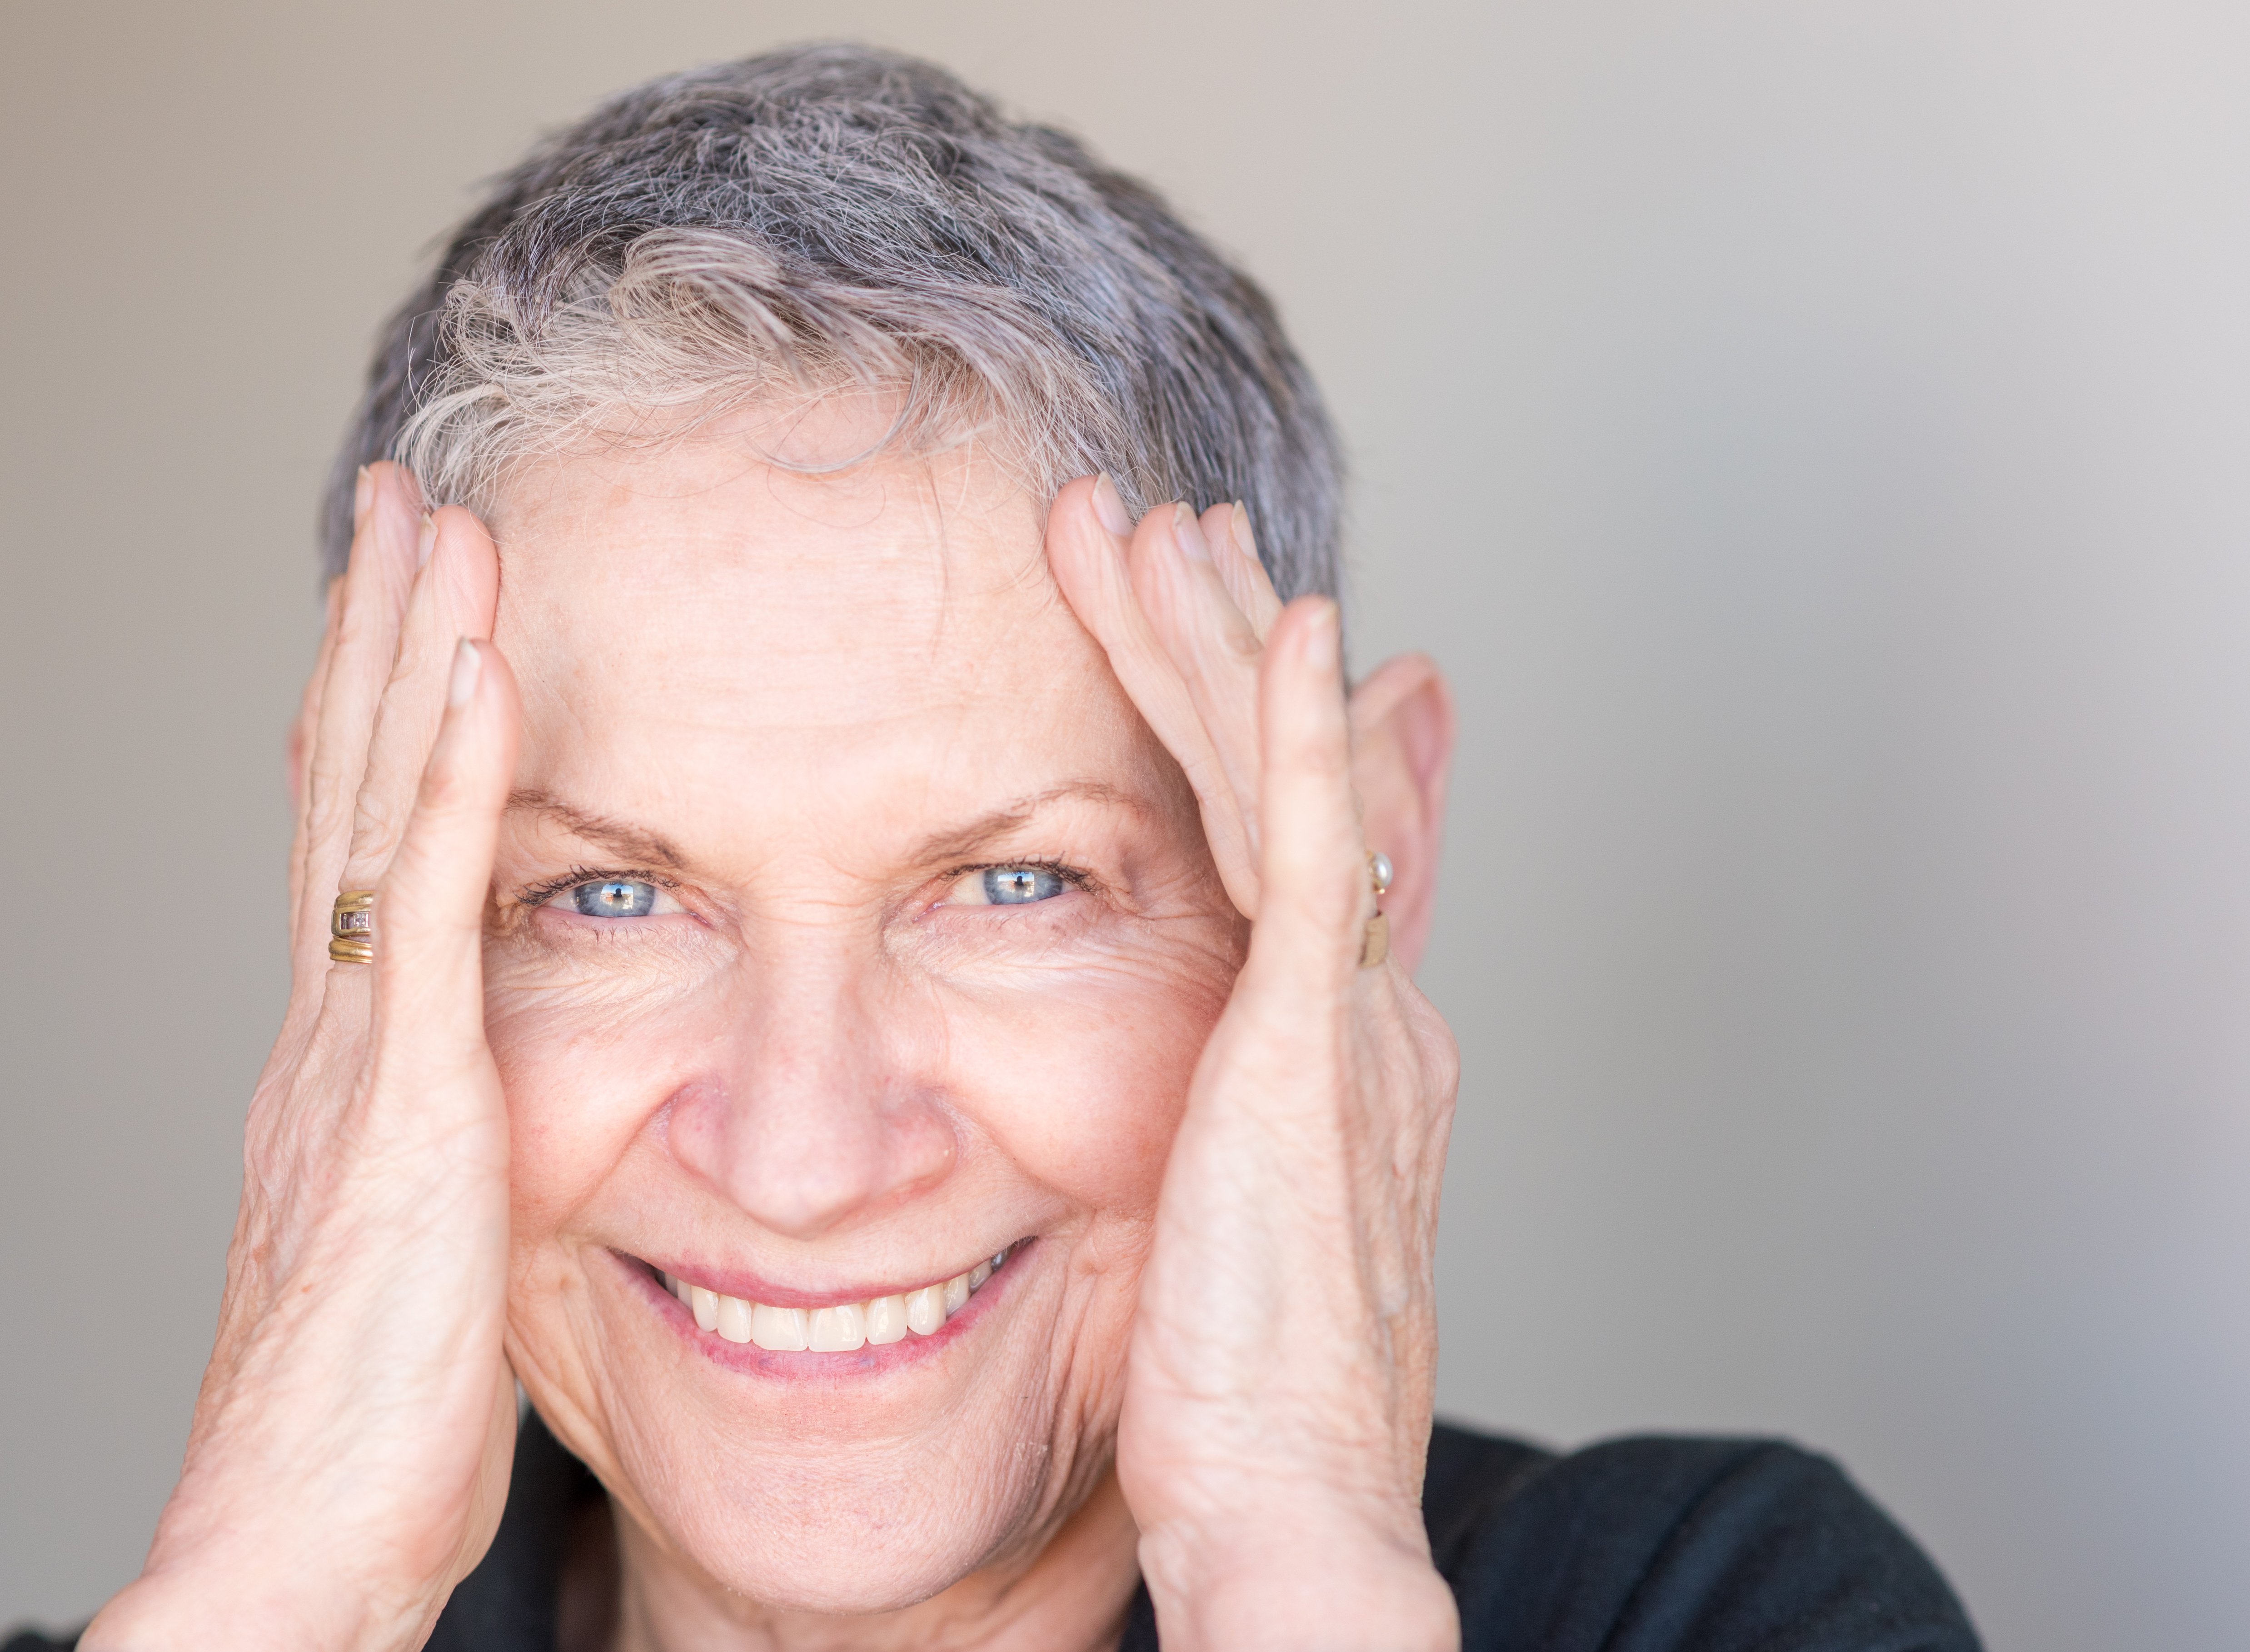 Older woman looking into camera and smiling | Photo: Shutterstock